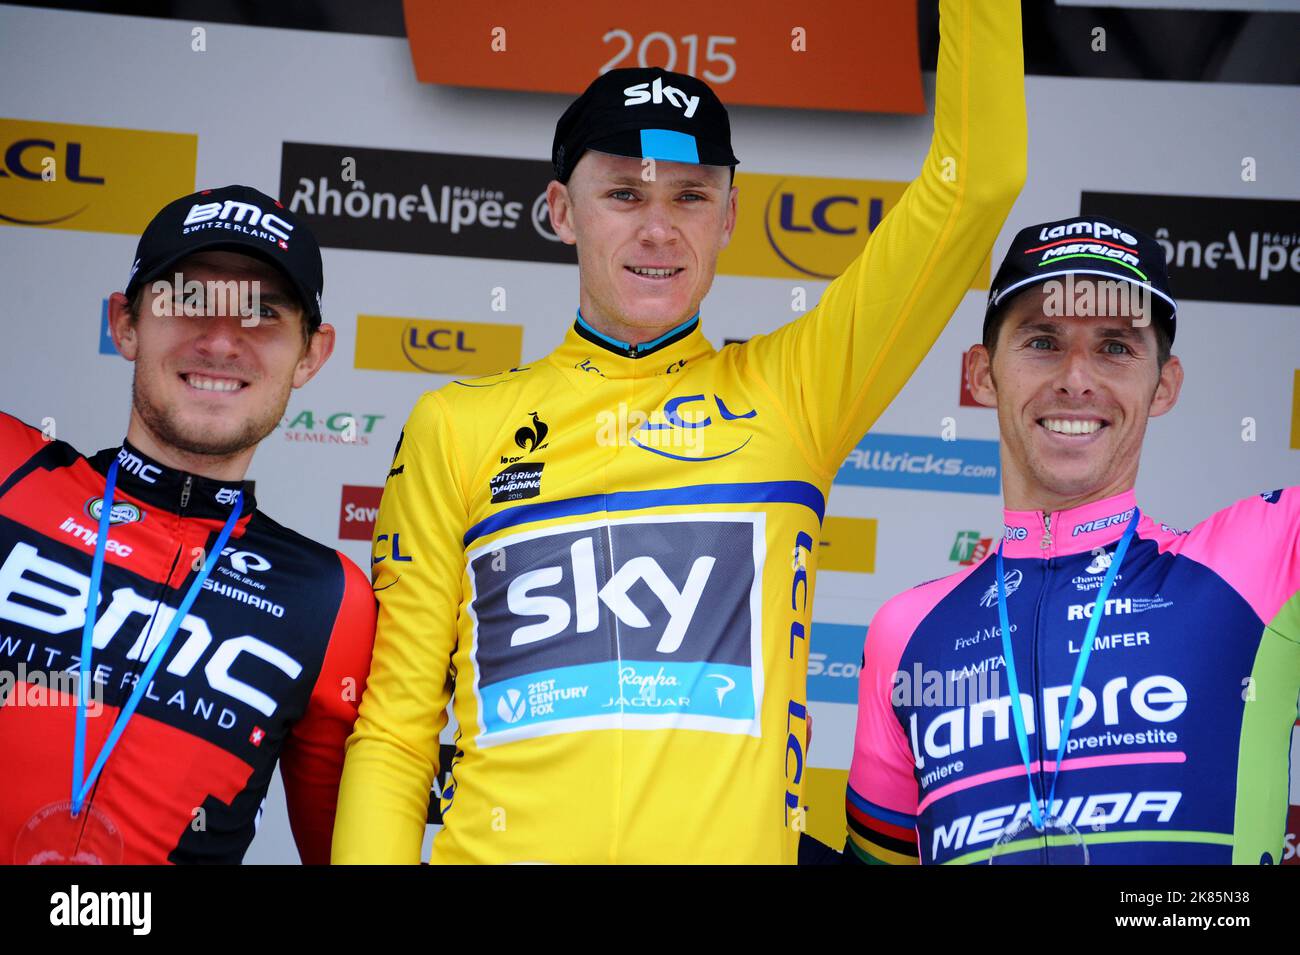 Criterium du Dauphine - Saint-Gervais-les-Bains - Modane Valfrejus  - Stage 8 - Chris Froome - Team Sky wins the final stage to secure victory in the Criterium du Dauphine for the second time. On the podium with Teejay Van Garderen team BMC and Rui Costa (Por) Lampre-Merida Stock Photo